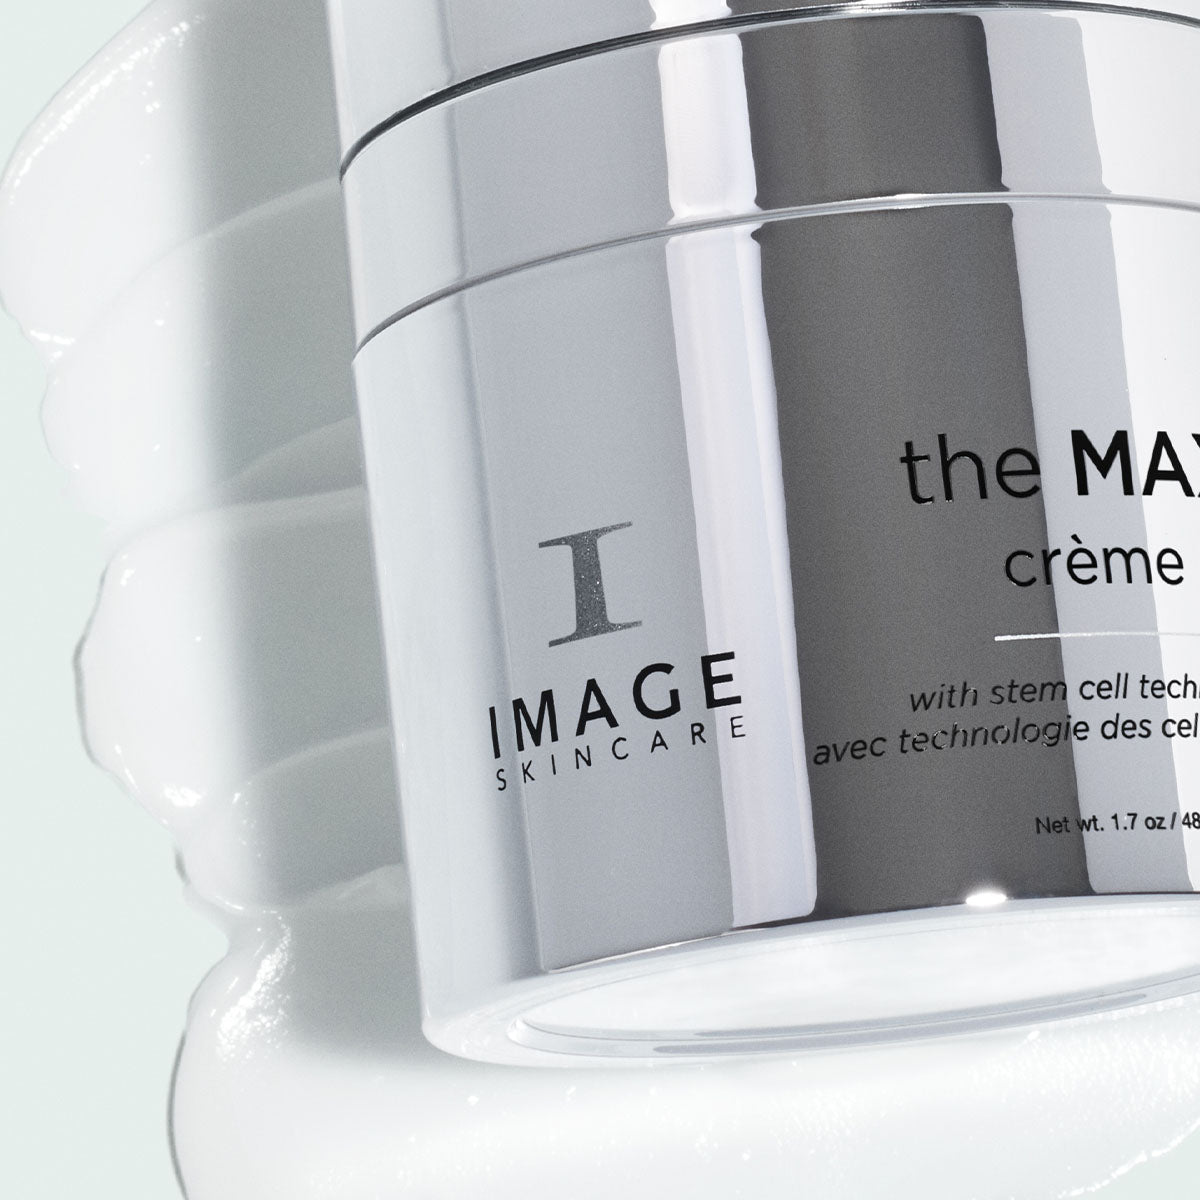 Image Skincare - The Max- Stem Cell Creme